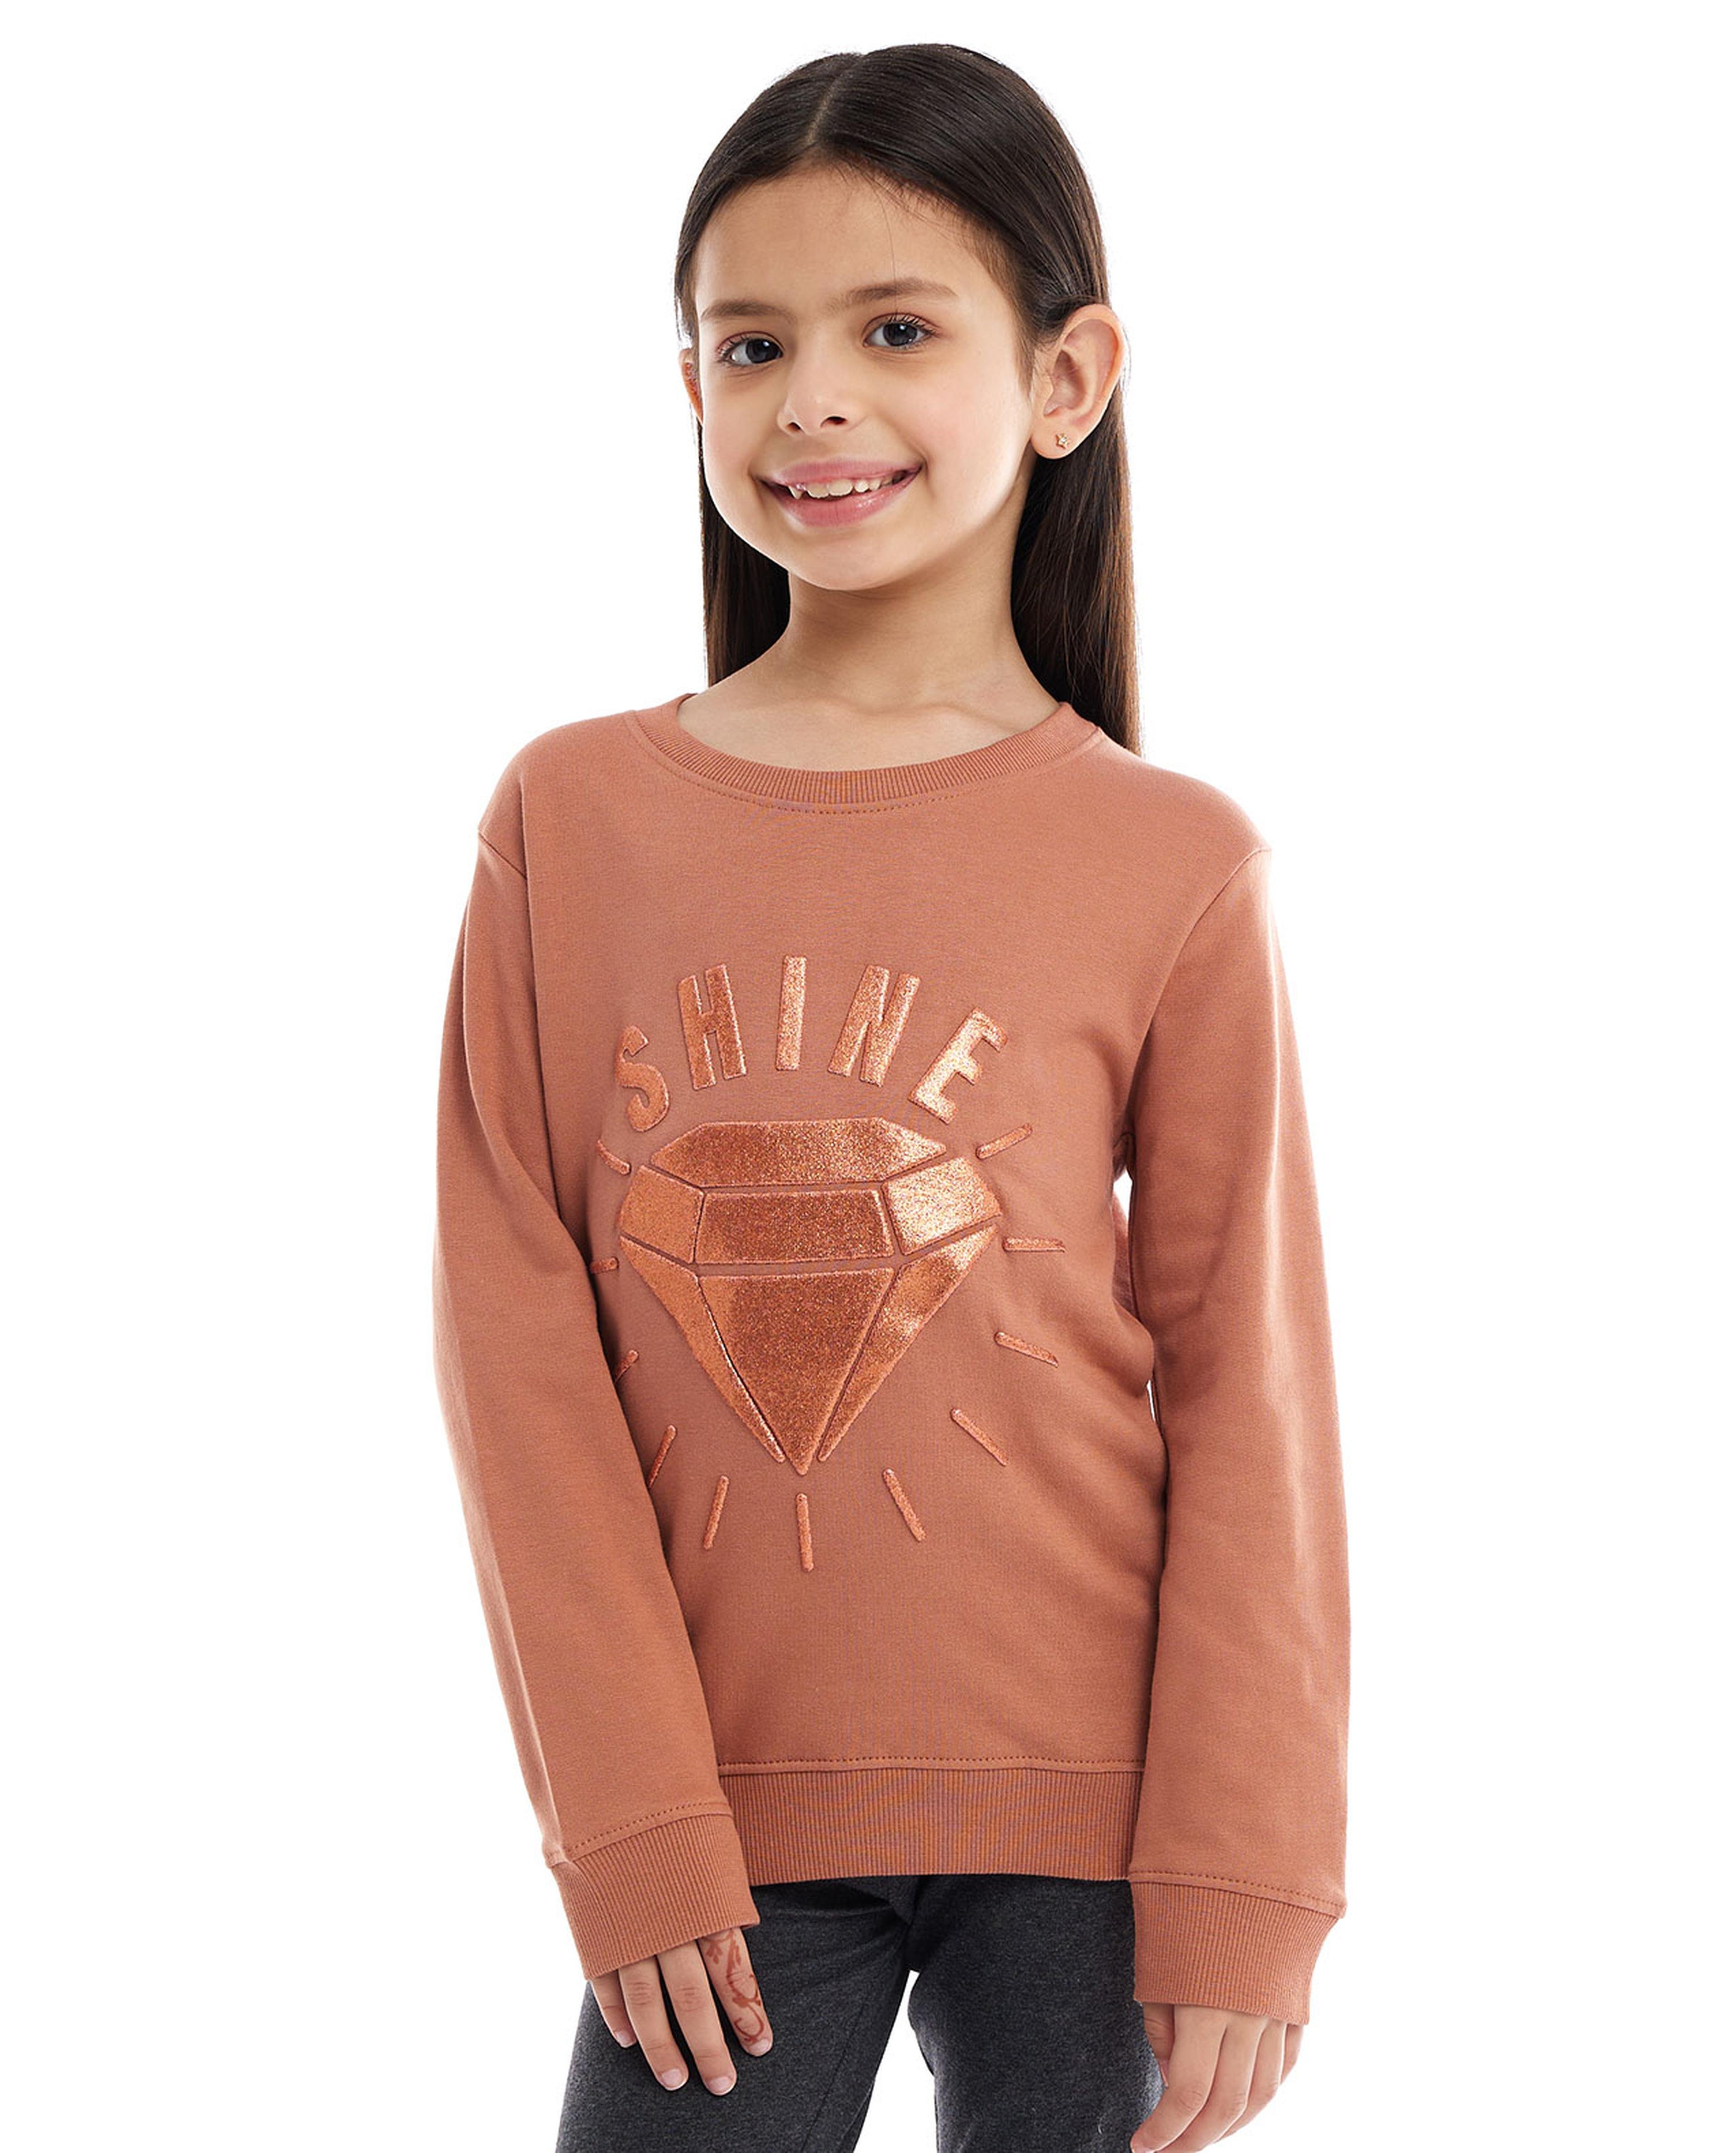 Glitter Print Sweatshirt with Crew Neck and Long Sleeves